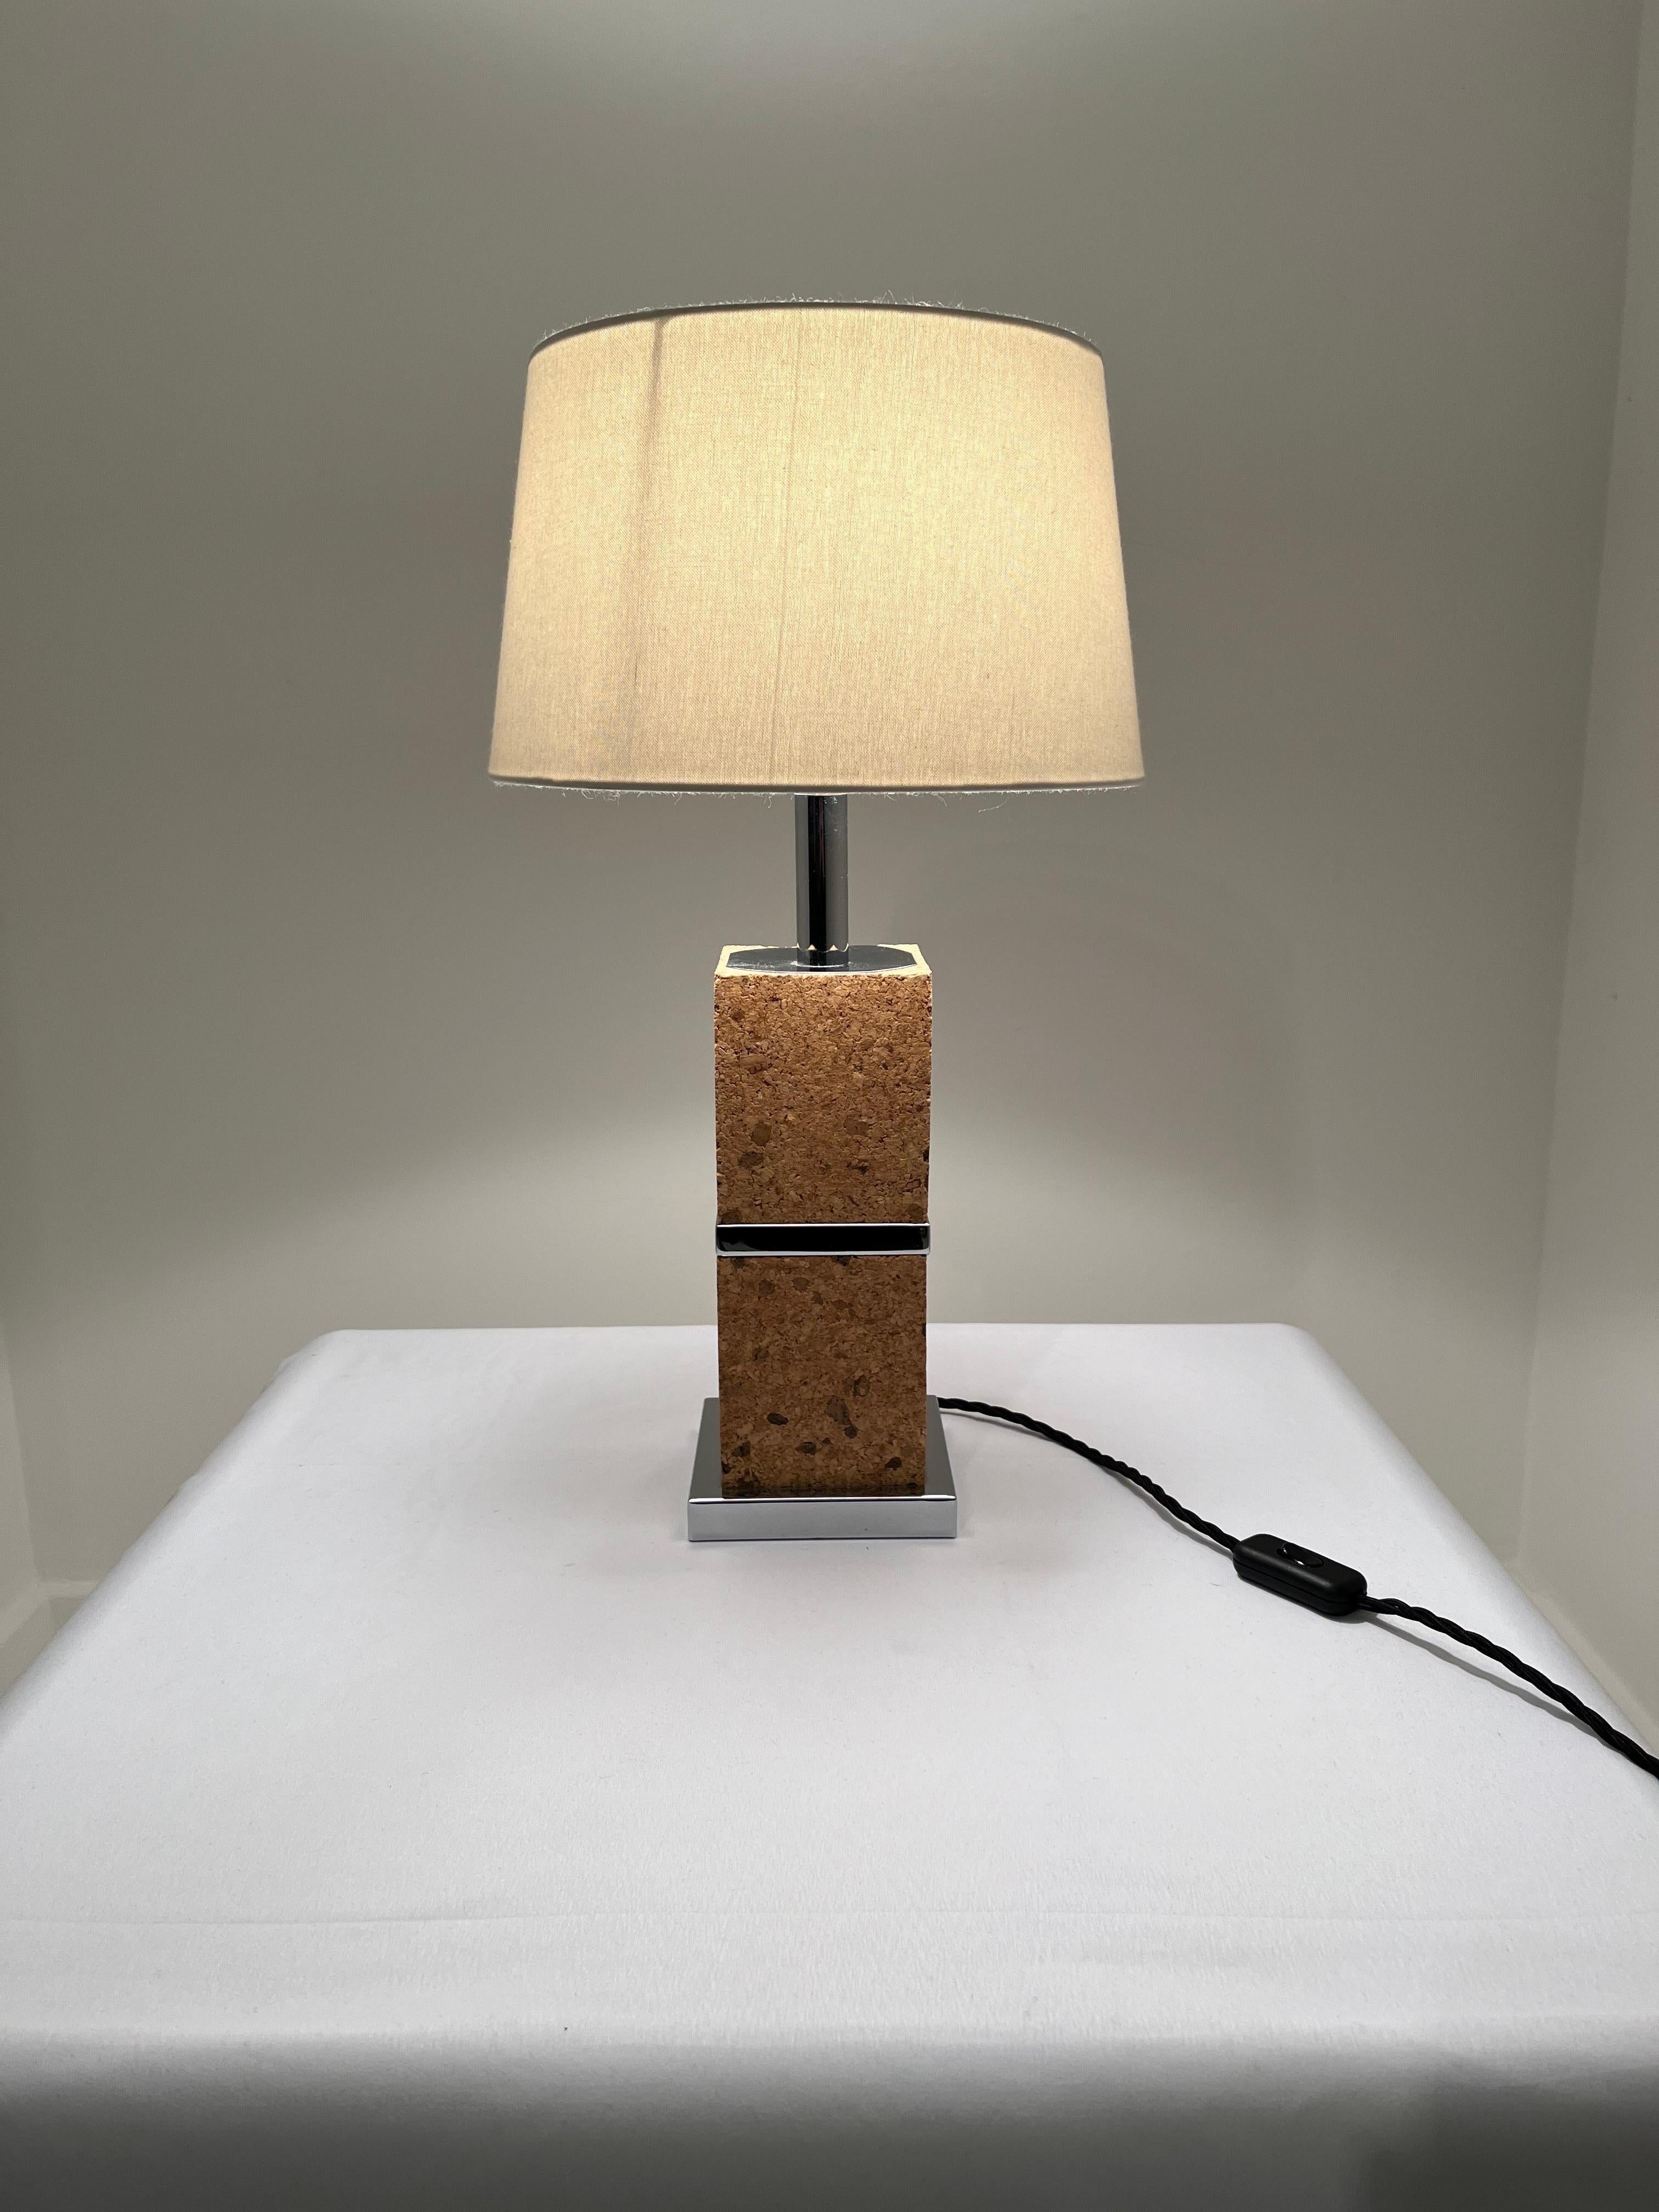 Frech Chrome Cork Lamp 
Nice Modern Design From 10970s

Excellent condition as shown. 
Rewired for uk 

